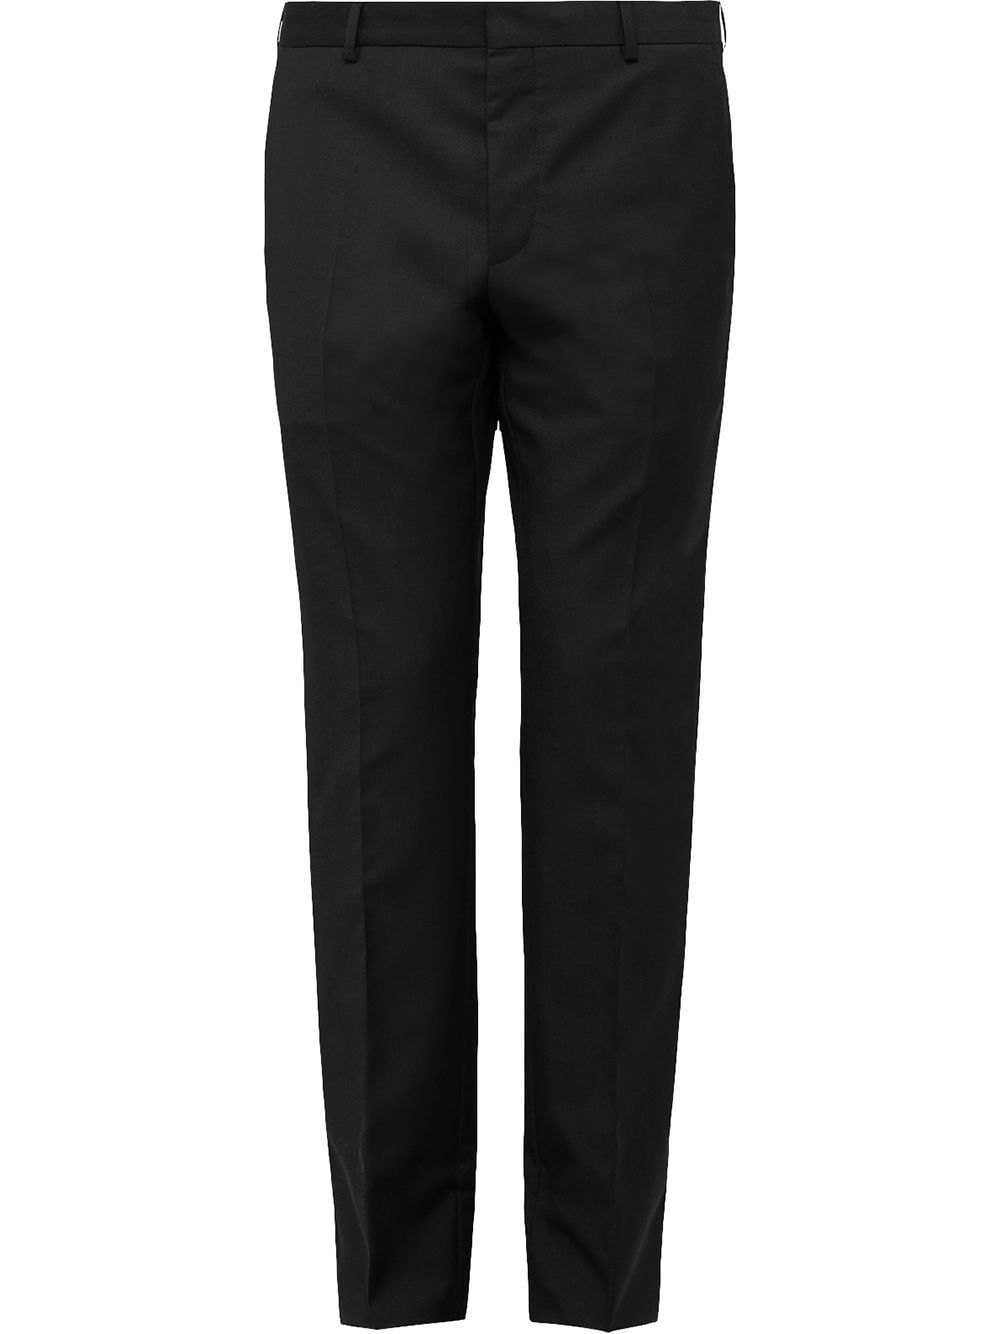 Image 1 of Prada mid-rise tailored trousers